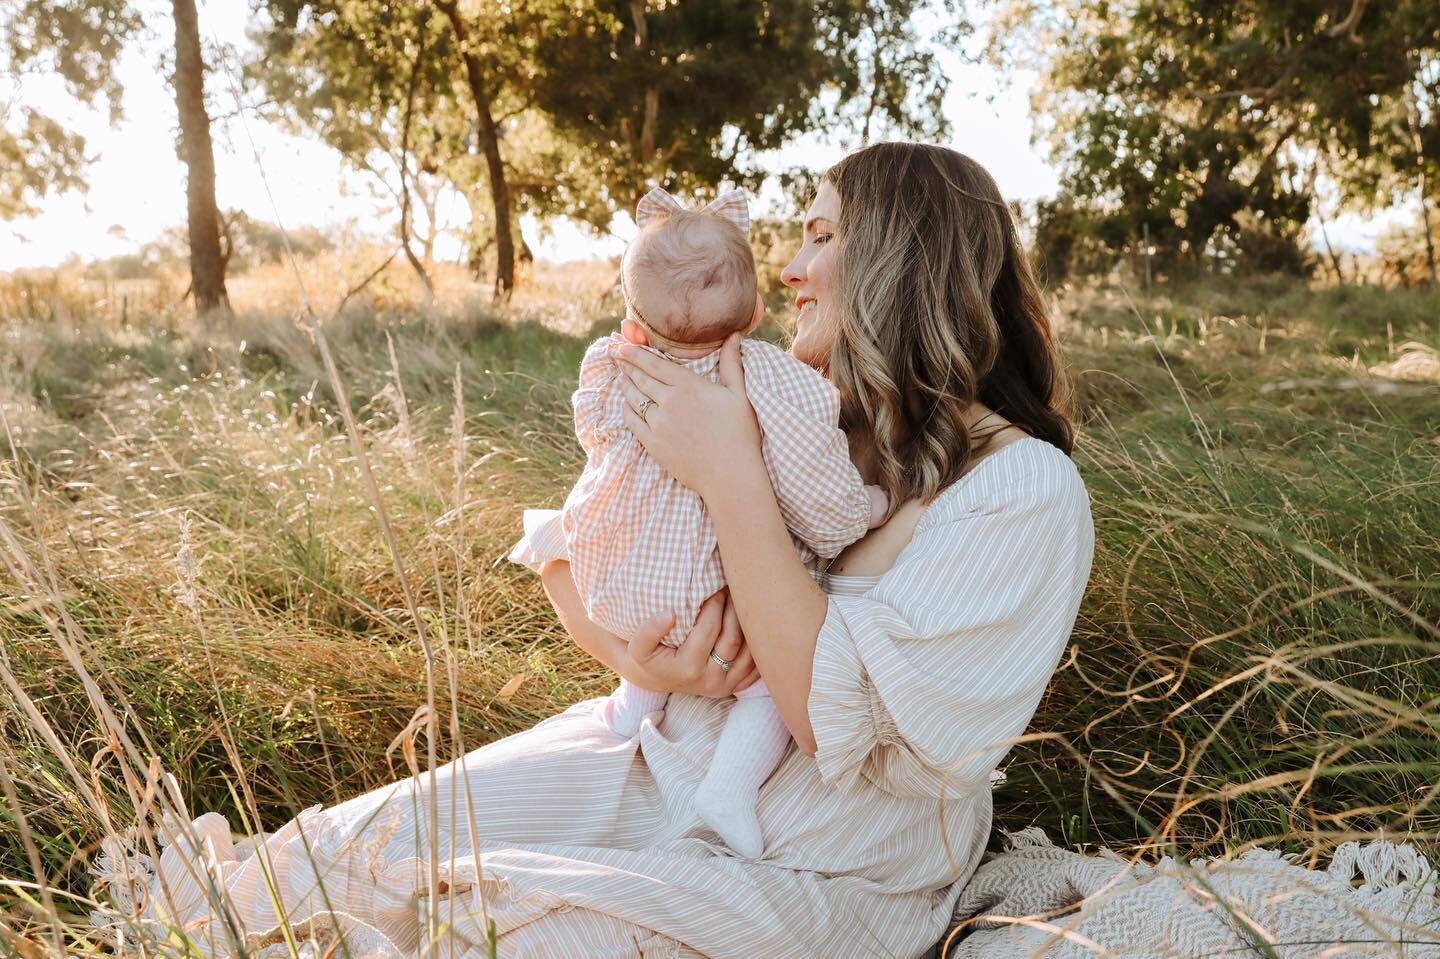 After a week of grey skies and challenging moments, I finished my weekend with a beautiful family session, where the sky opened and the sun said hello. 

Such a beautiful motherhood moment ✨